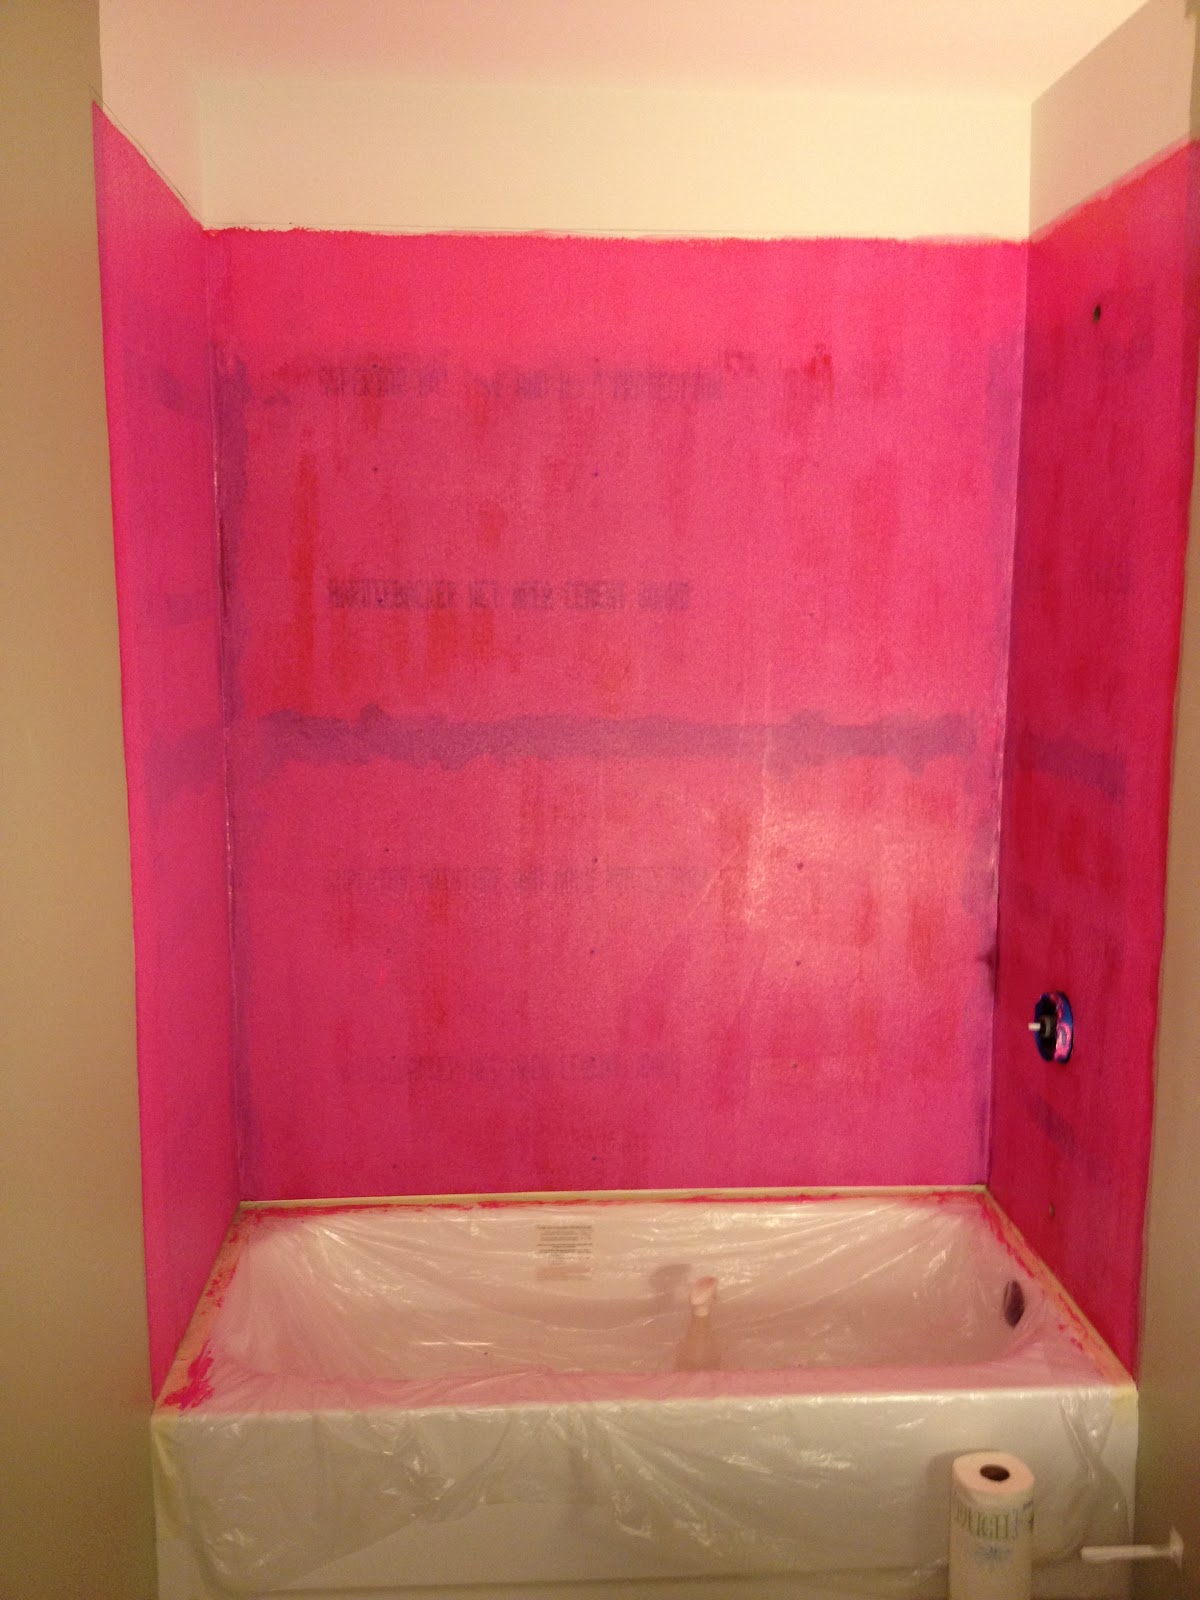 Shower renovation project showing cement board that has been prepped with waterproofing membrane prior to tile or stone installation